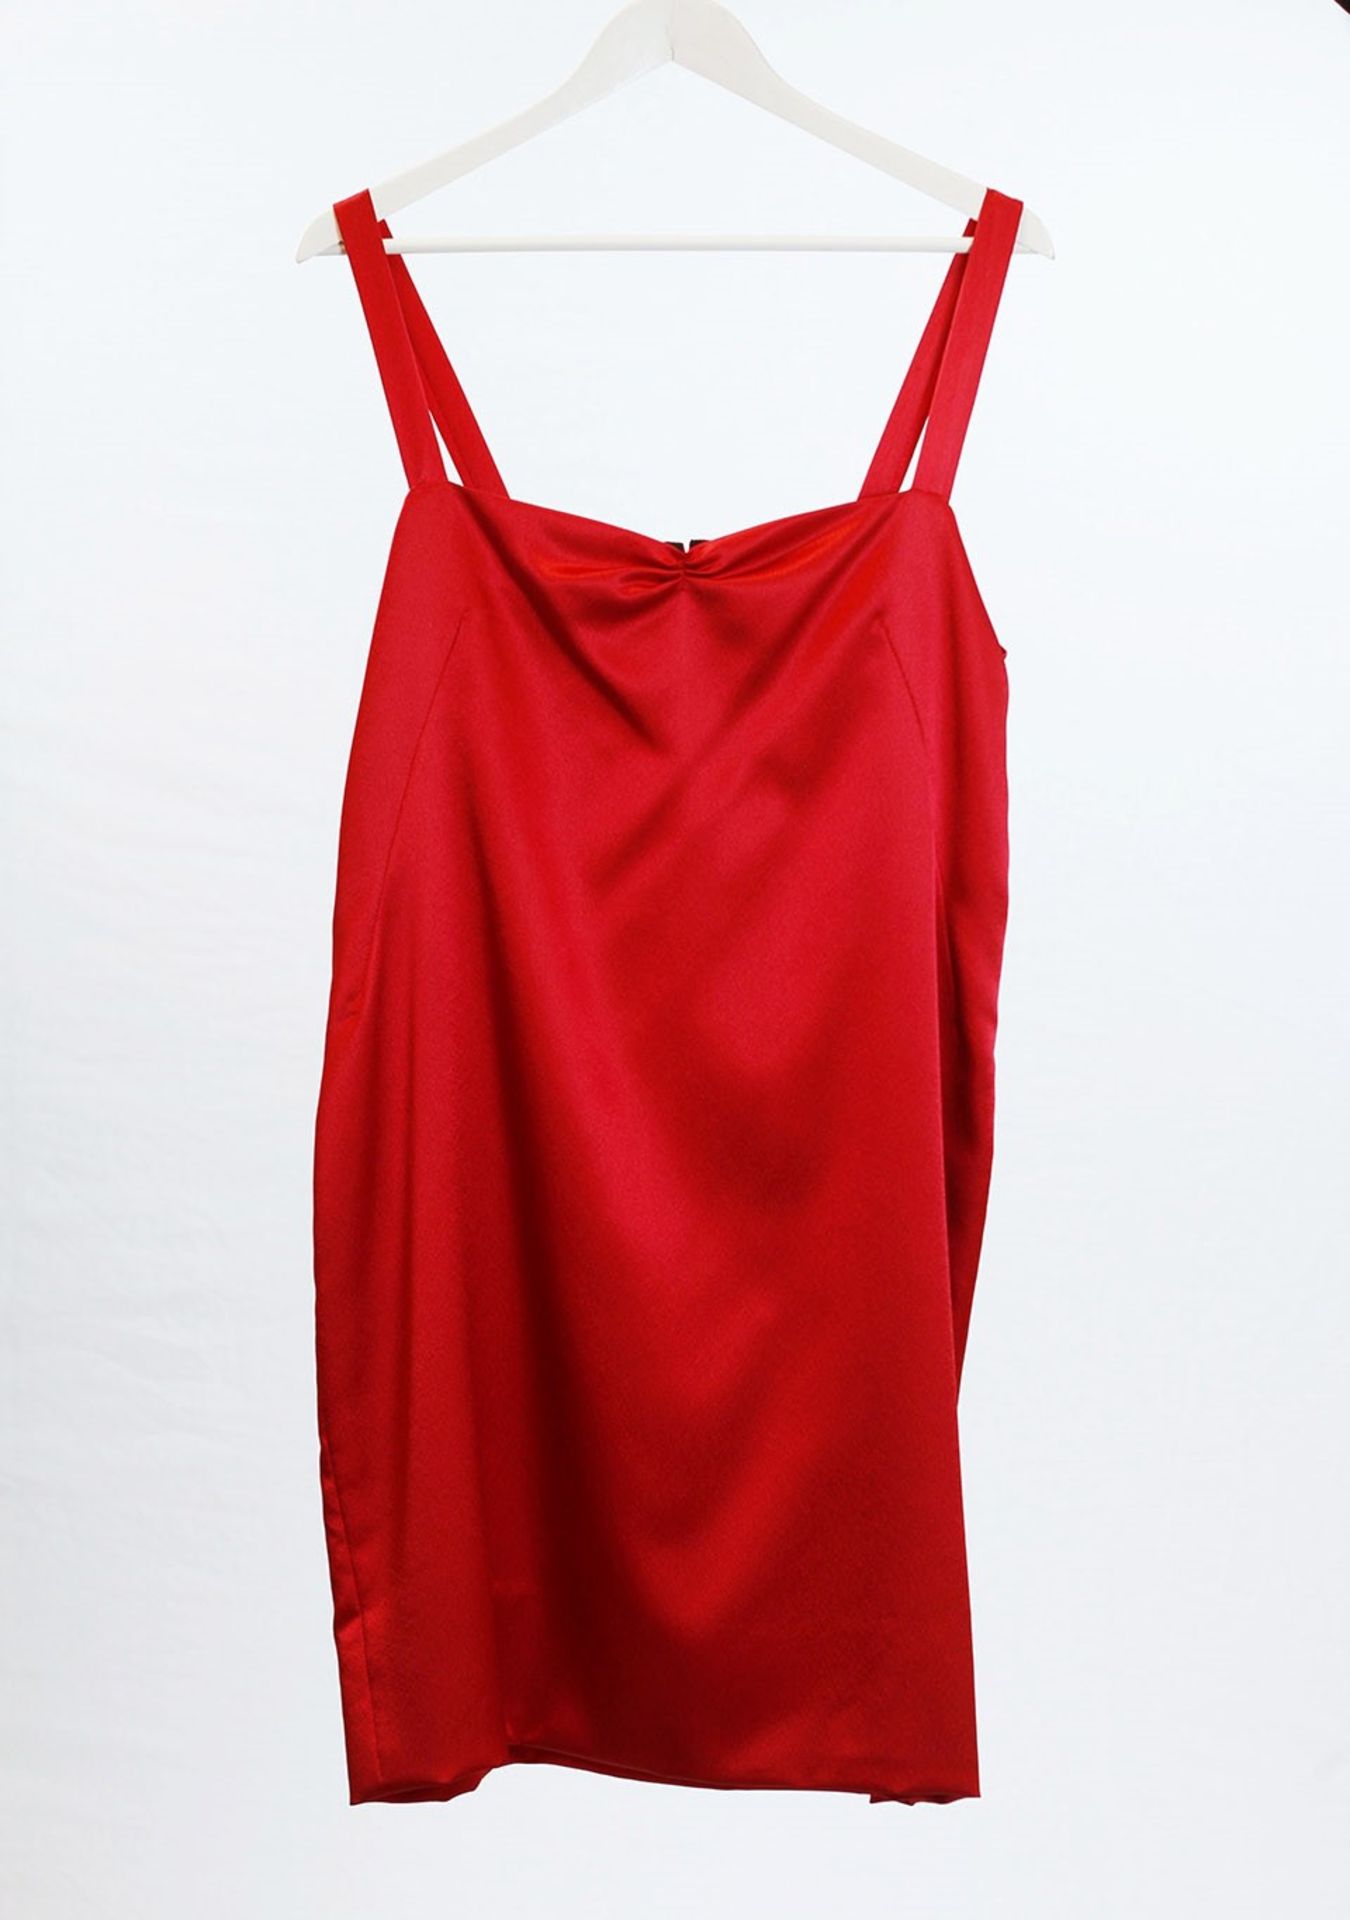 1 x Boutique Le Duc Red Dress - Size: 18 - Material: 55% Polyester, 45% Acetate - From a High End